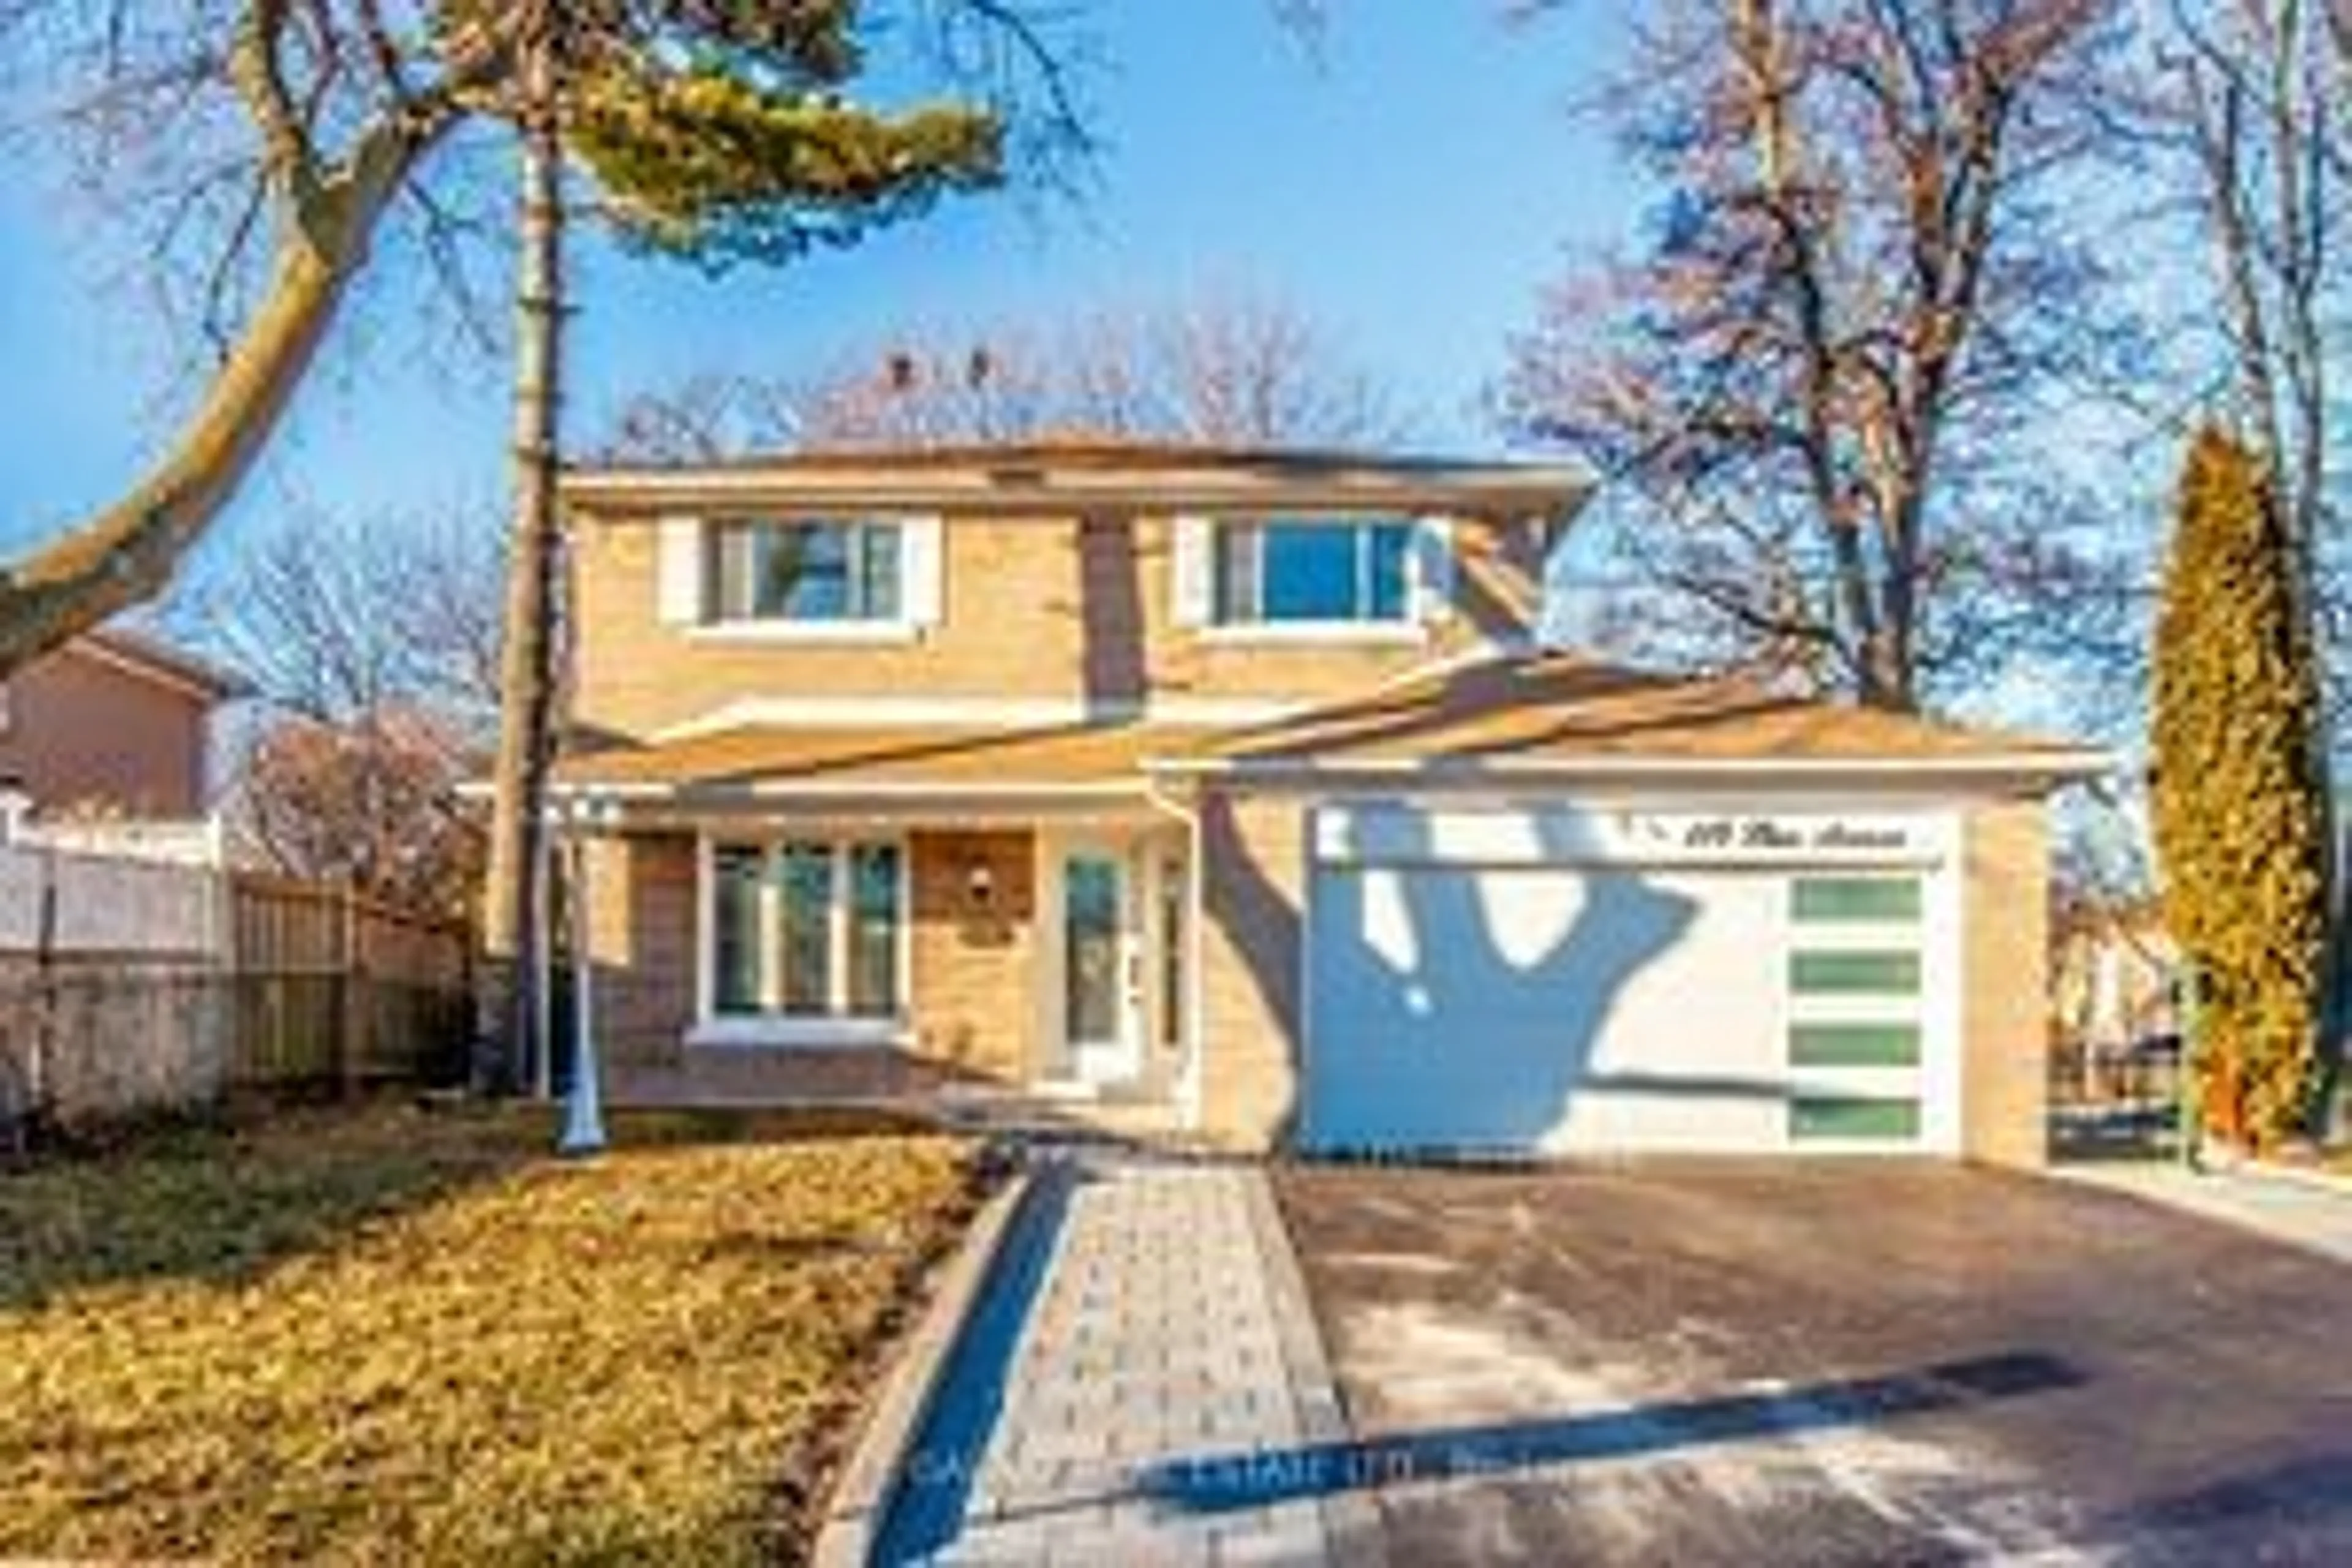 Home with brick exterior material for 114 Slan Ave, Toronto Ontario M1G 3B8